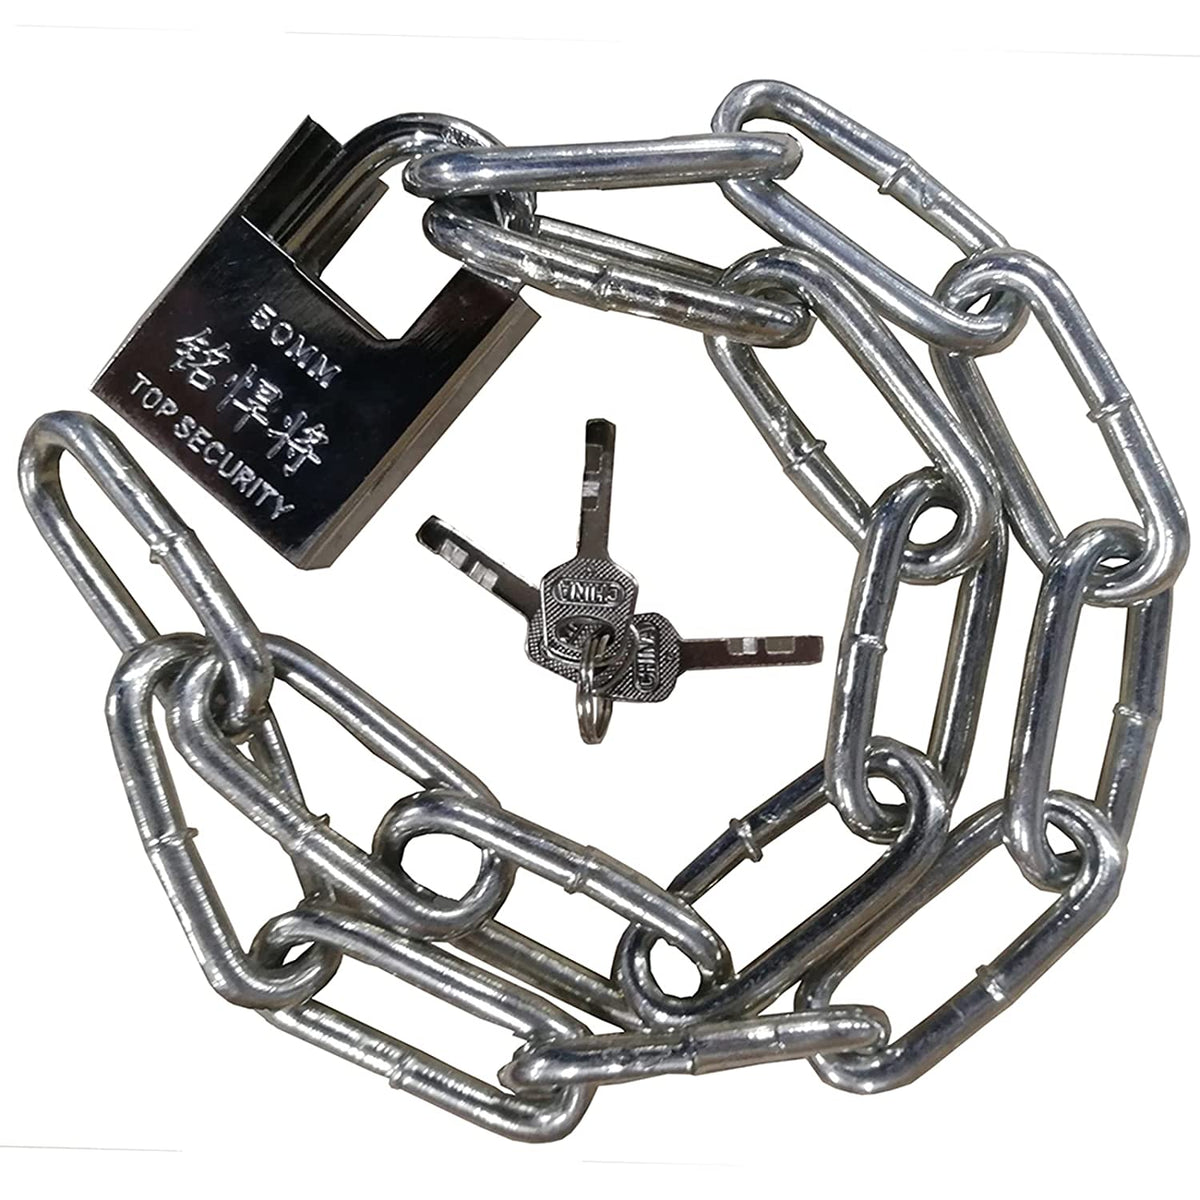 Premium Case-Hardened Security Chain and Lock Kit Nearly Impossible to  Defeat